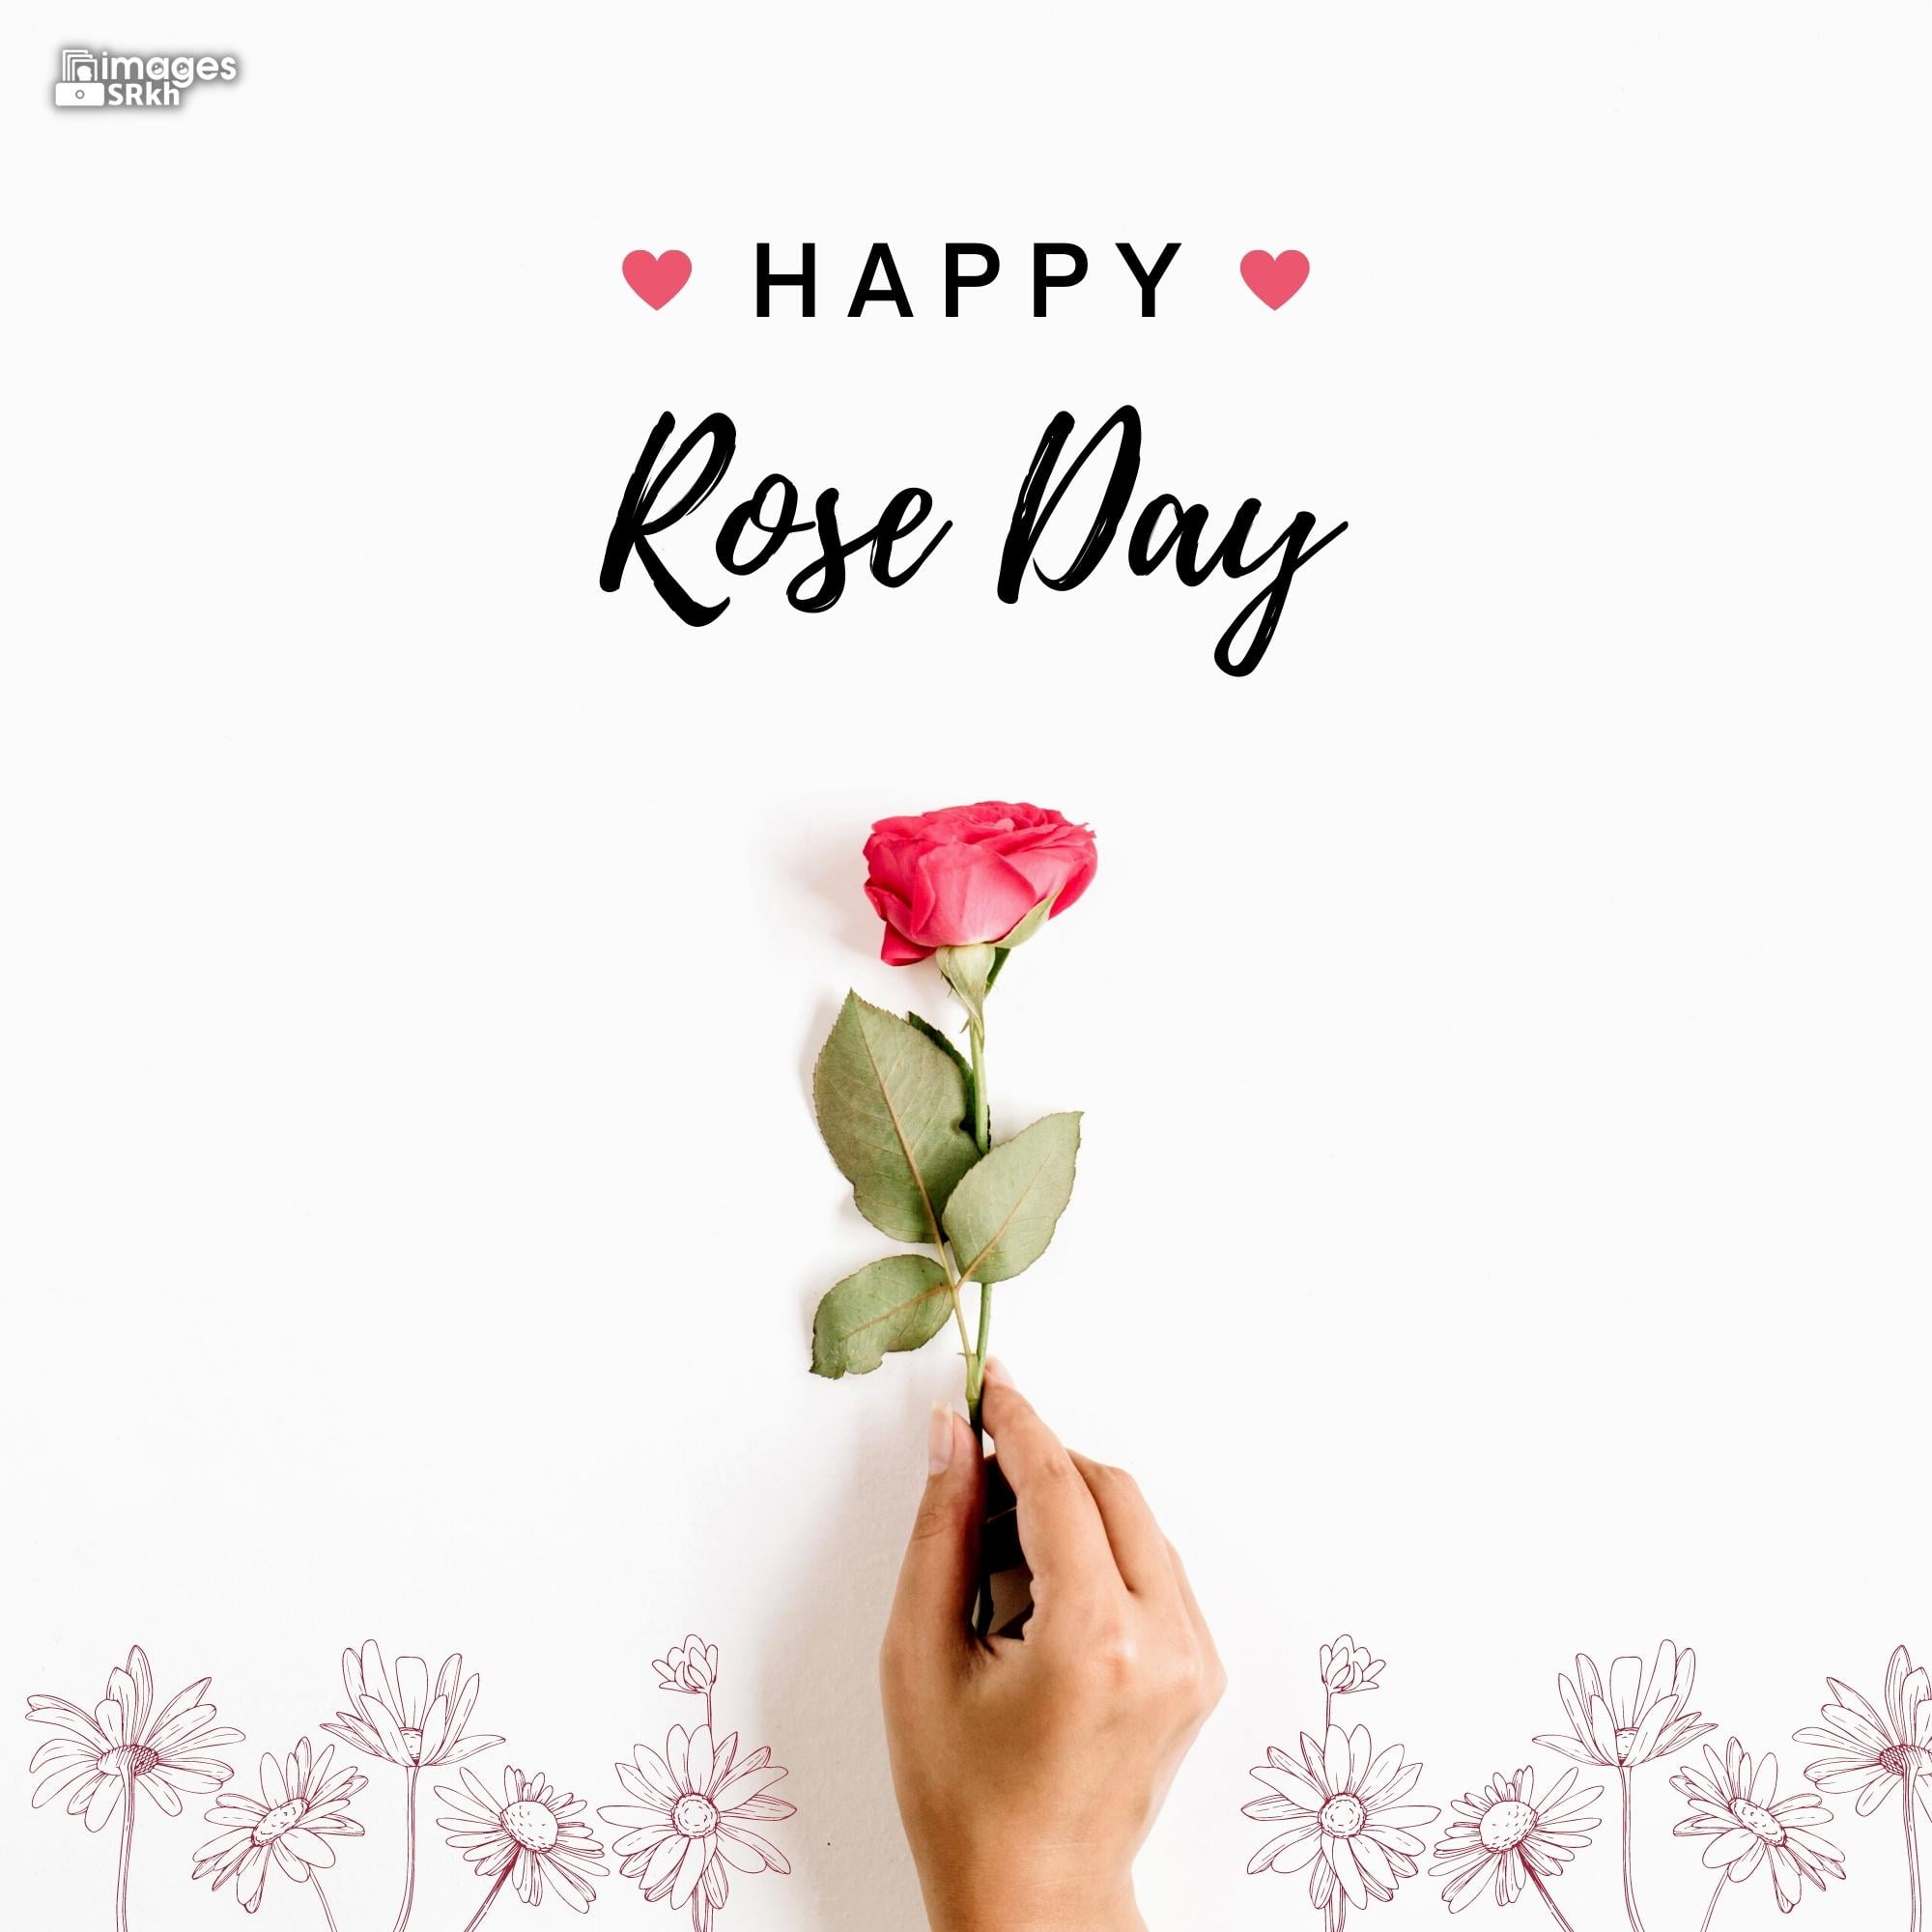 Happy Rose Day Image Hd Download (79)